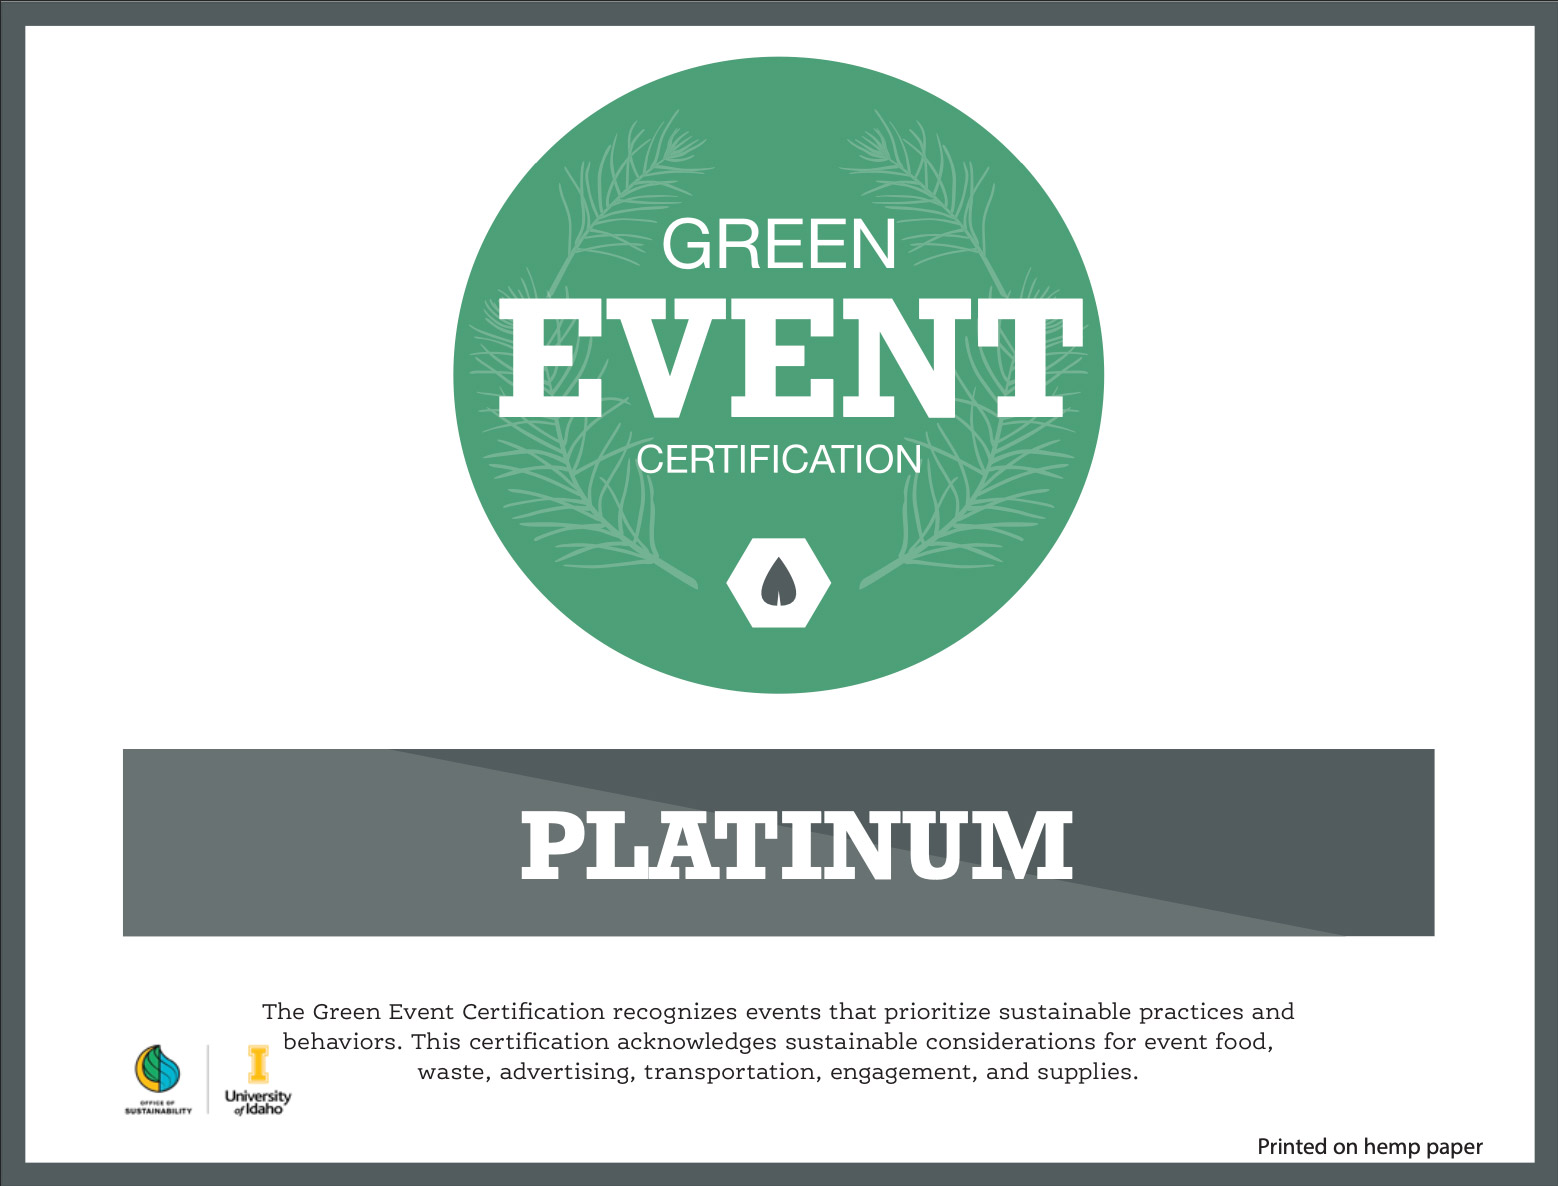 Platinum certification for the Palouse Project event